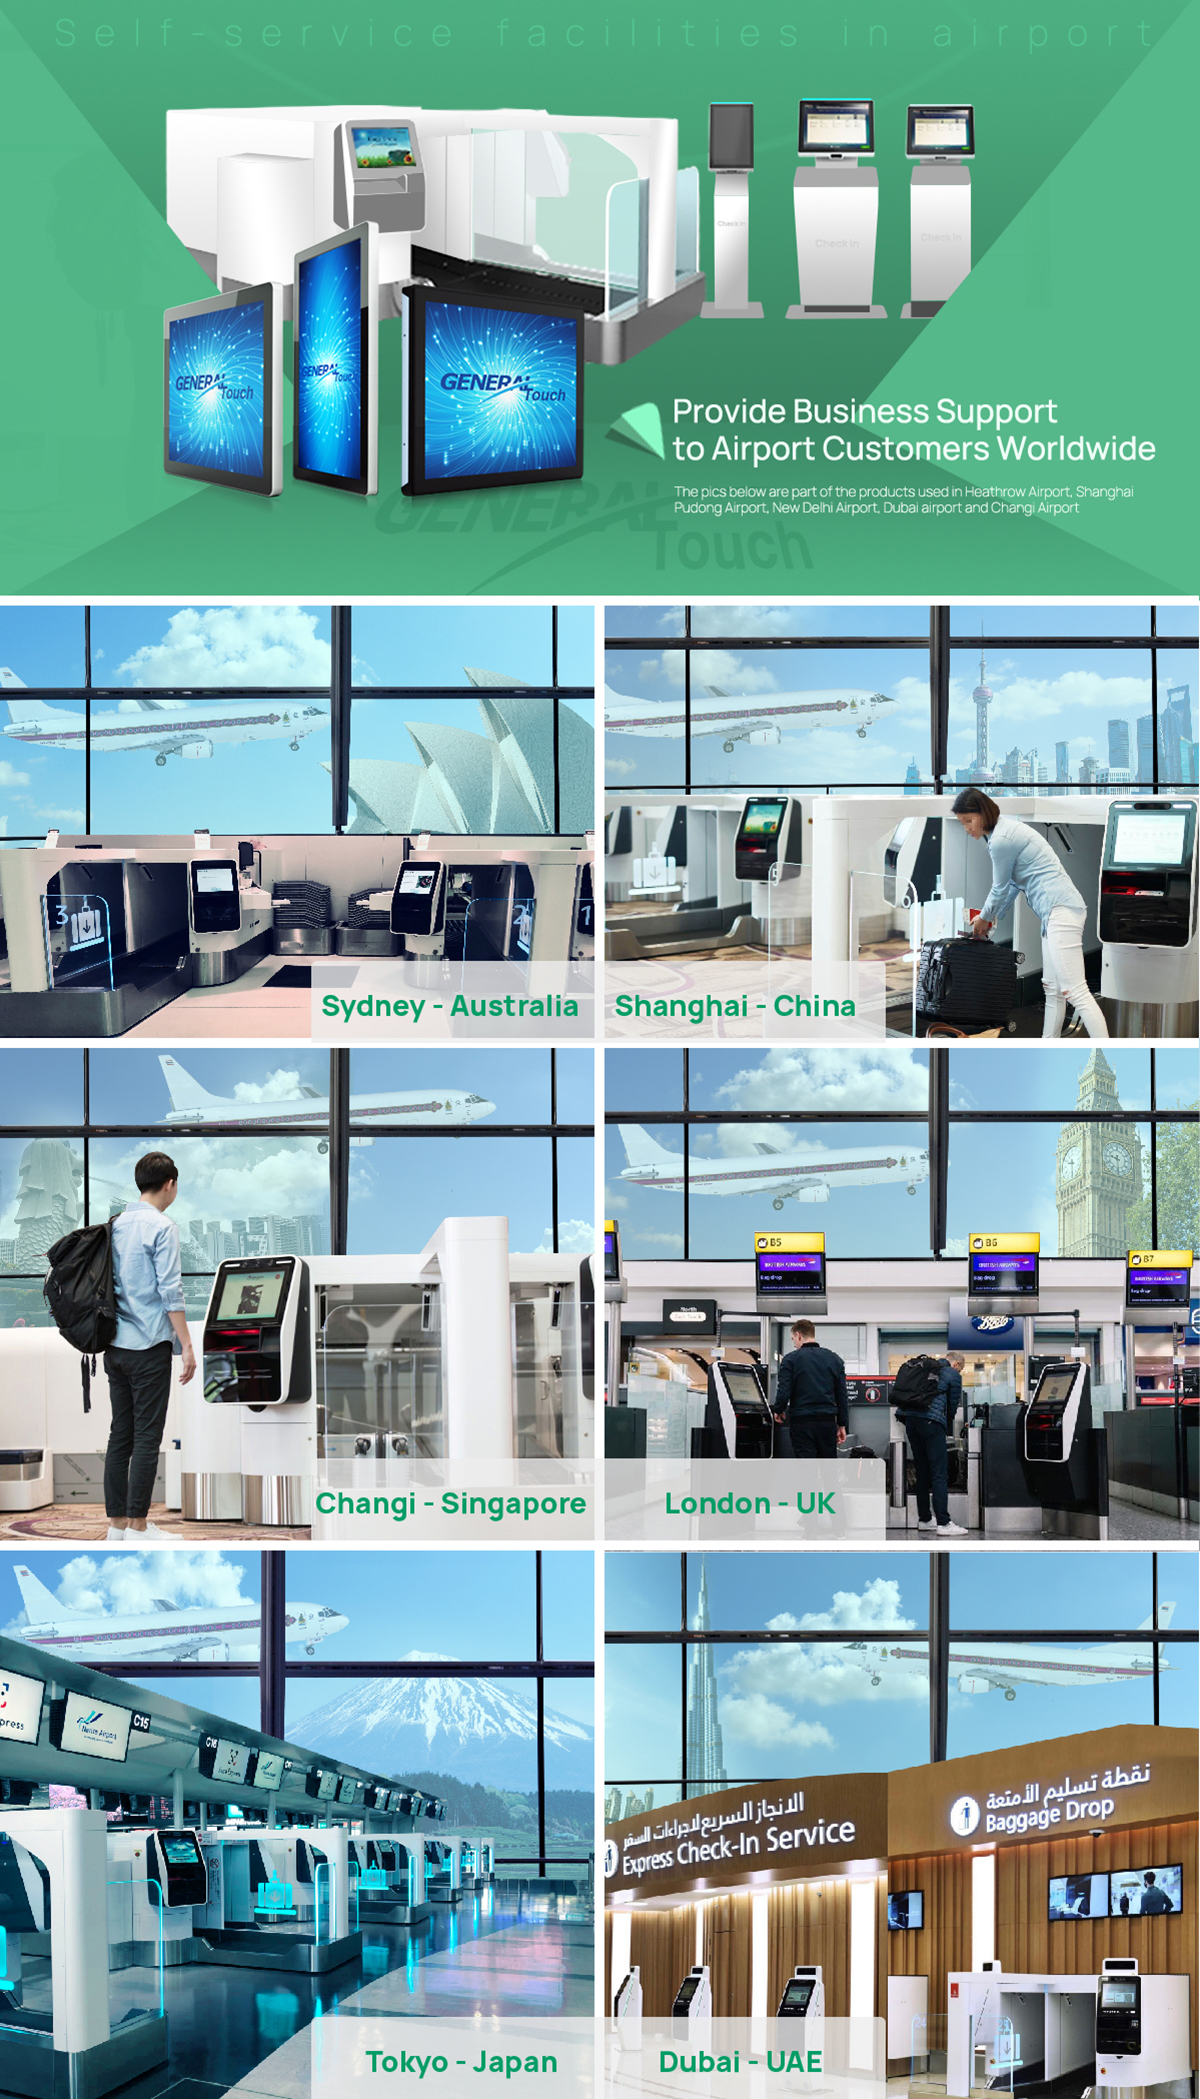 GT’s touchscreen products provide business support to airport customers worldwide